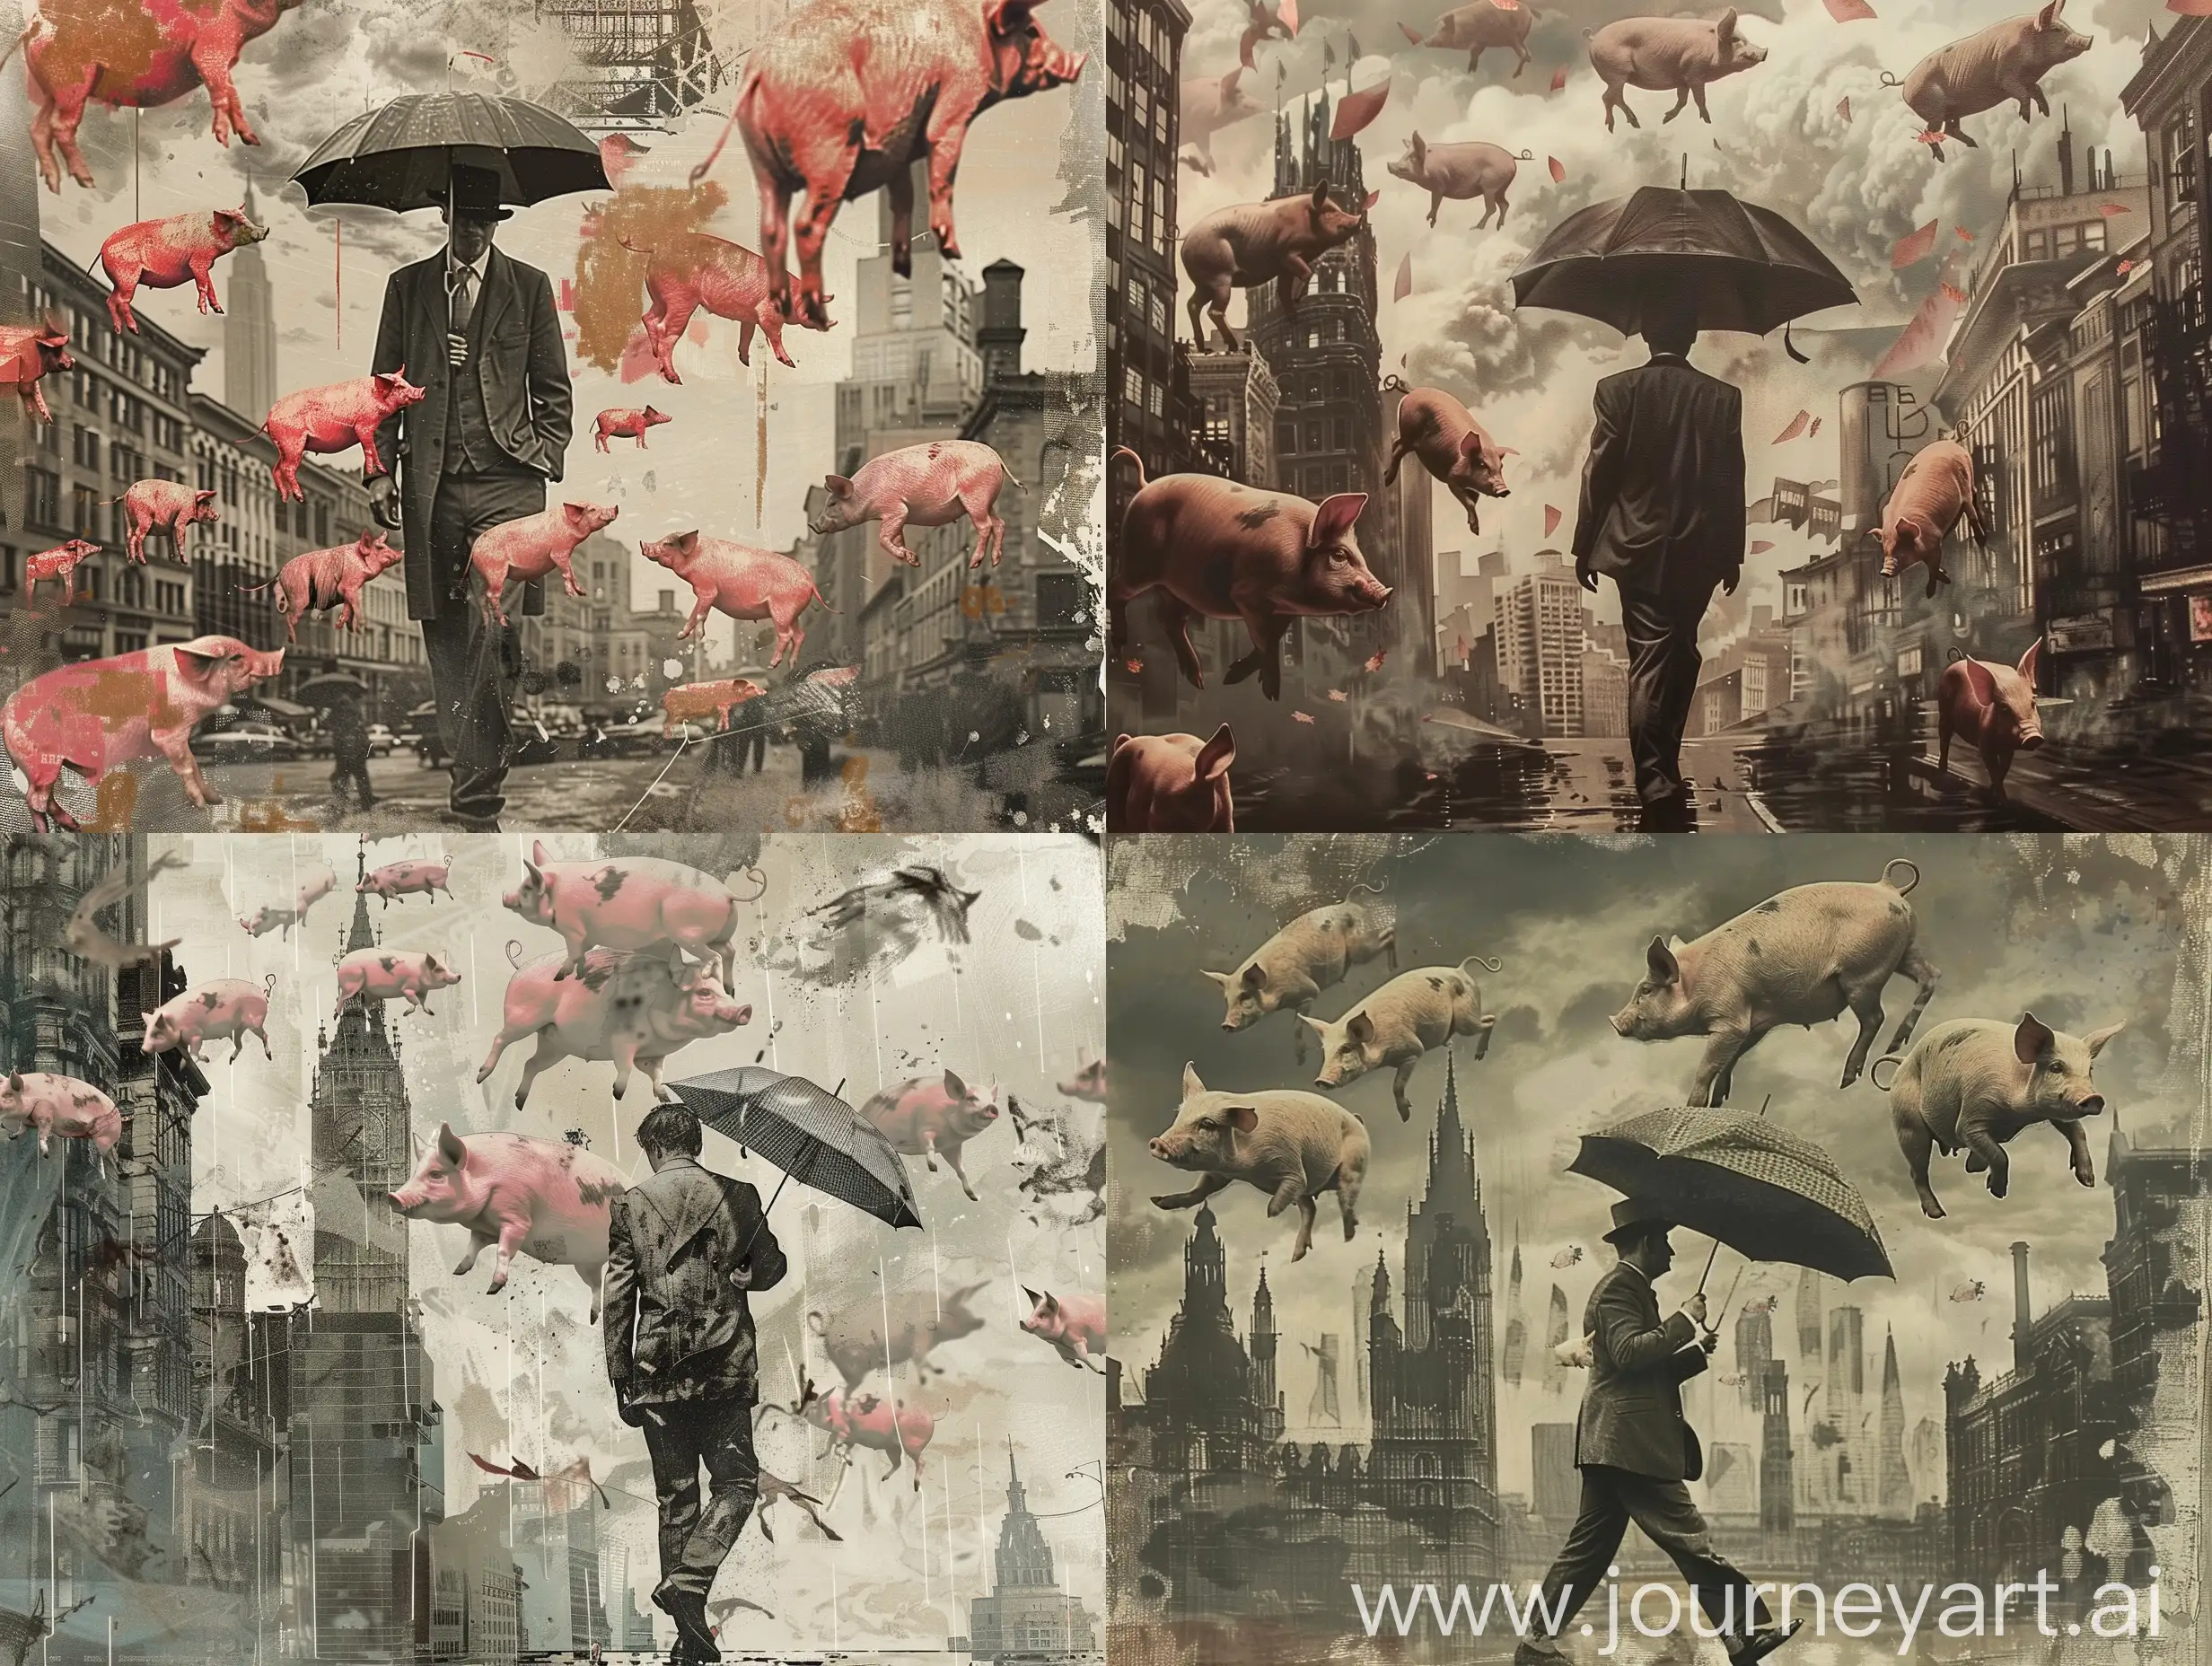 тату в стиле сингализмcinematic, surrealist art style, a positioned man walking with an umbrella, He wears a vintage suit and strides confidently. protecting himself from falling pigs, Many pigs fell from the sky, Black and white photos, pigs have colors, The background showcases a juxtaposition of Gothic and modern architecture, with tall, intricate buildings amidst a cityscape. The color palette is predominantly dark and muted, with sepia and gray tones. The sky is cloudy, adding a dramatic contrast to the pink pigs. The overall scene exudes a sense of oddity and whimsy, blending the surreal with the mundane.
